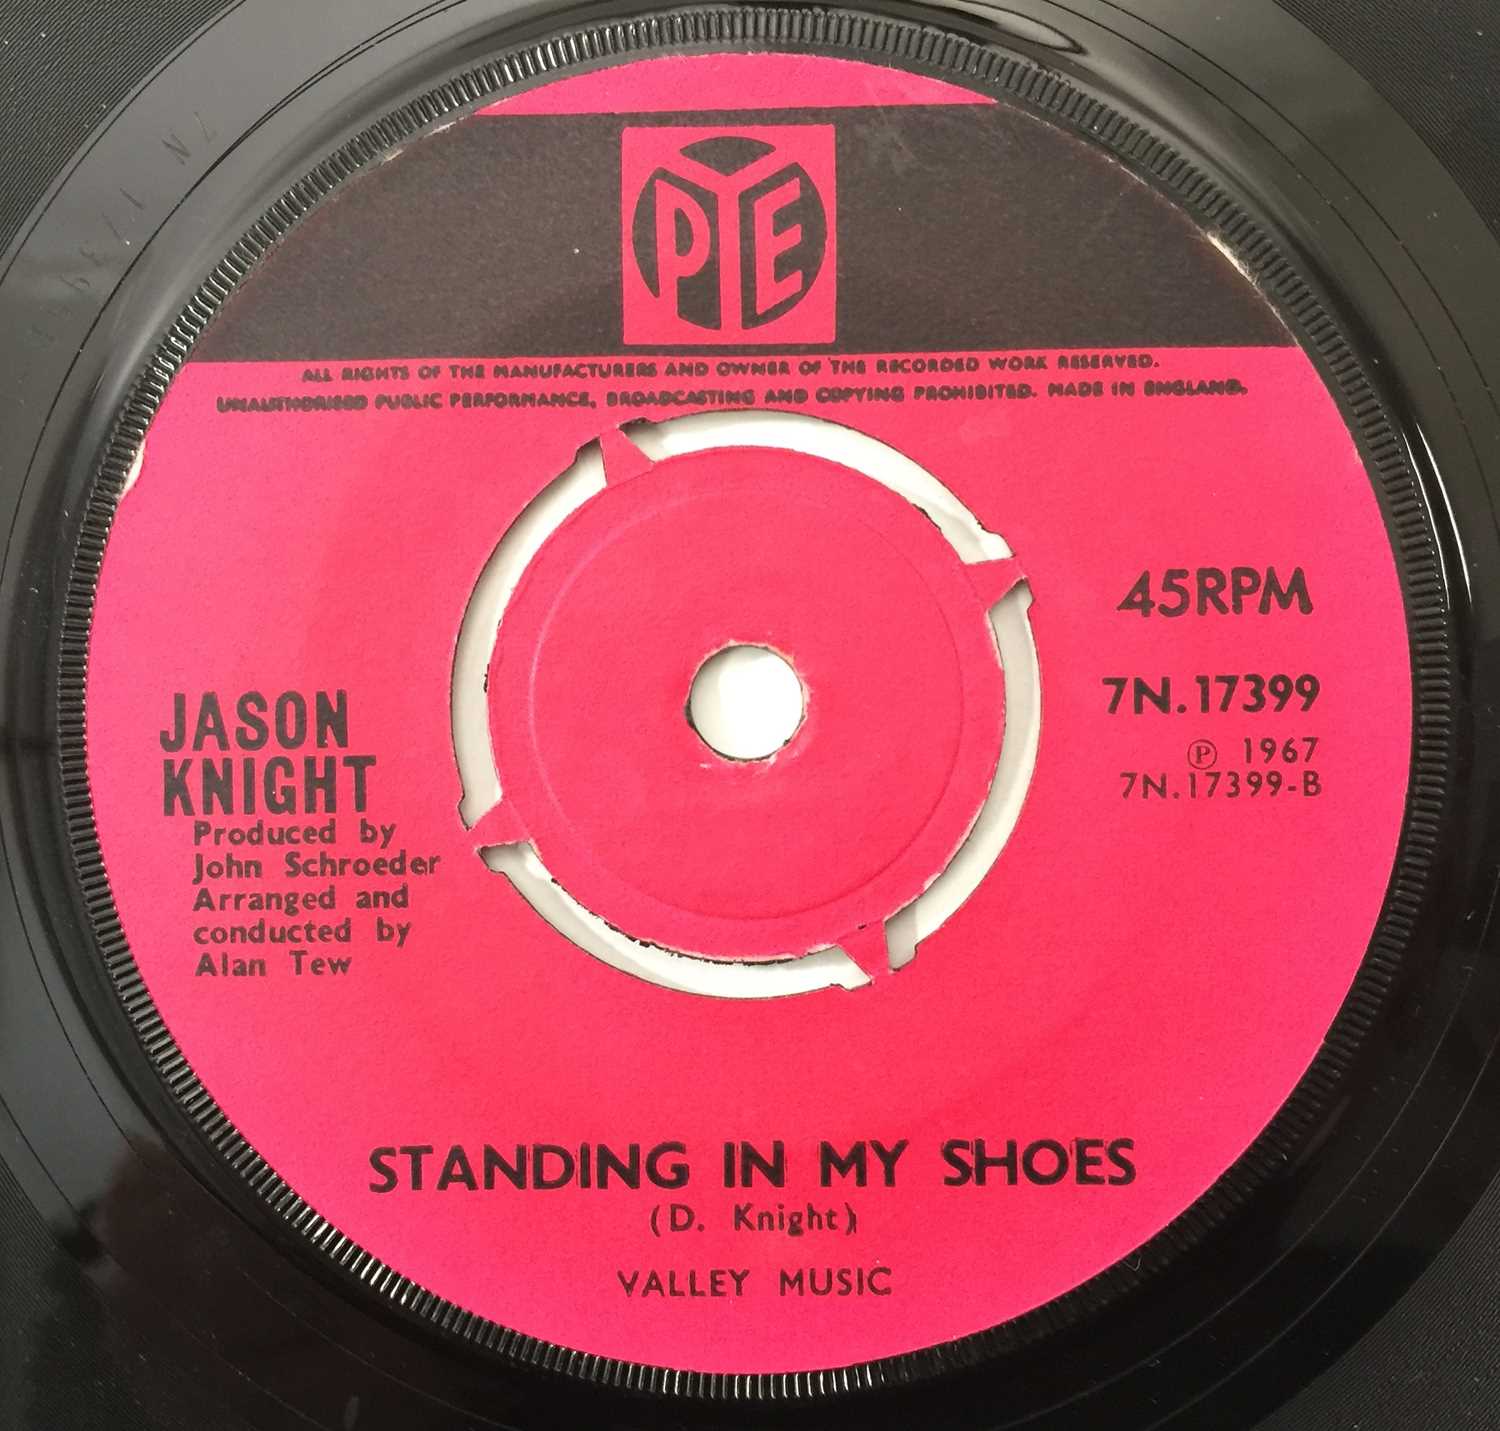 JASON KNIGHT - OUR LOVE IS GETTING STRONGER/ STANDING IN MY SHOES 7" (UK SOUL - PYE 7N.17399) - Image 2 of 2